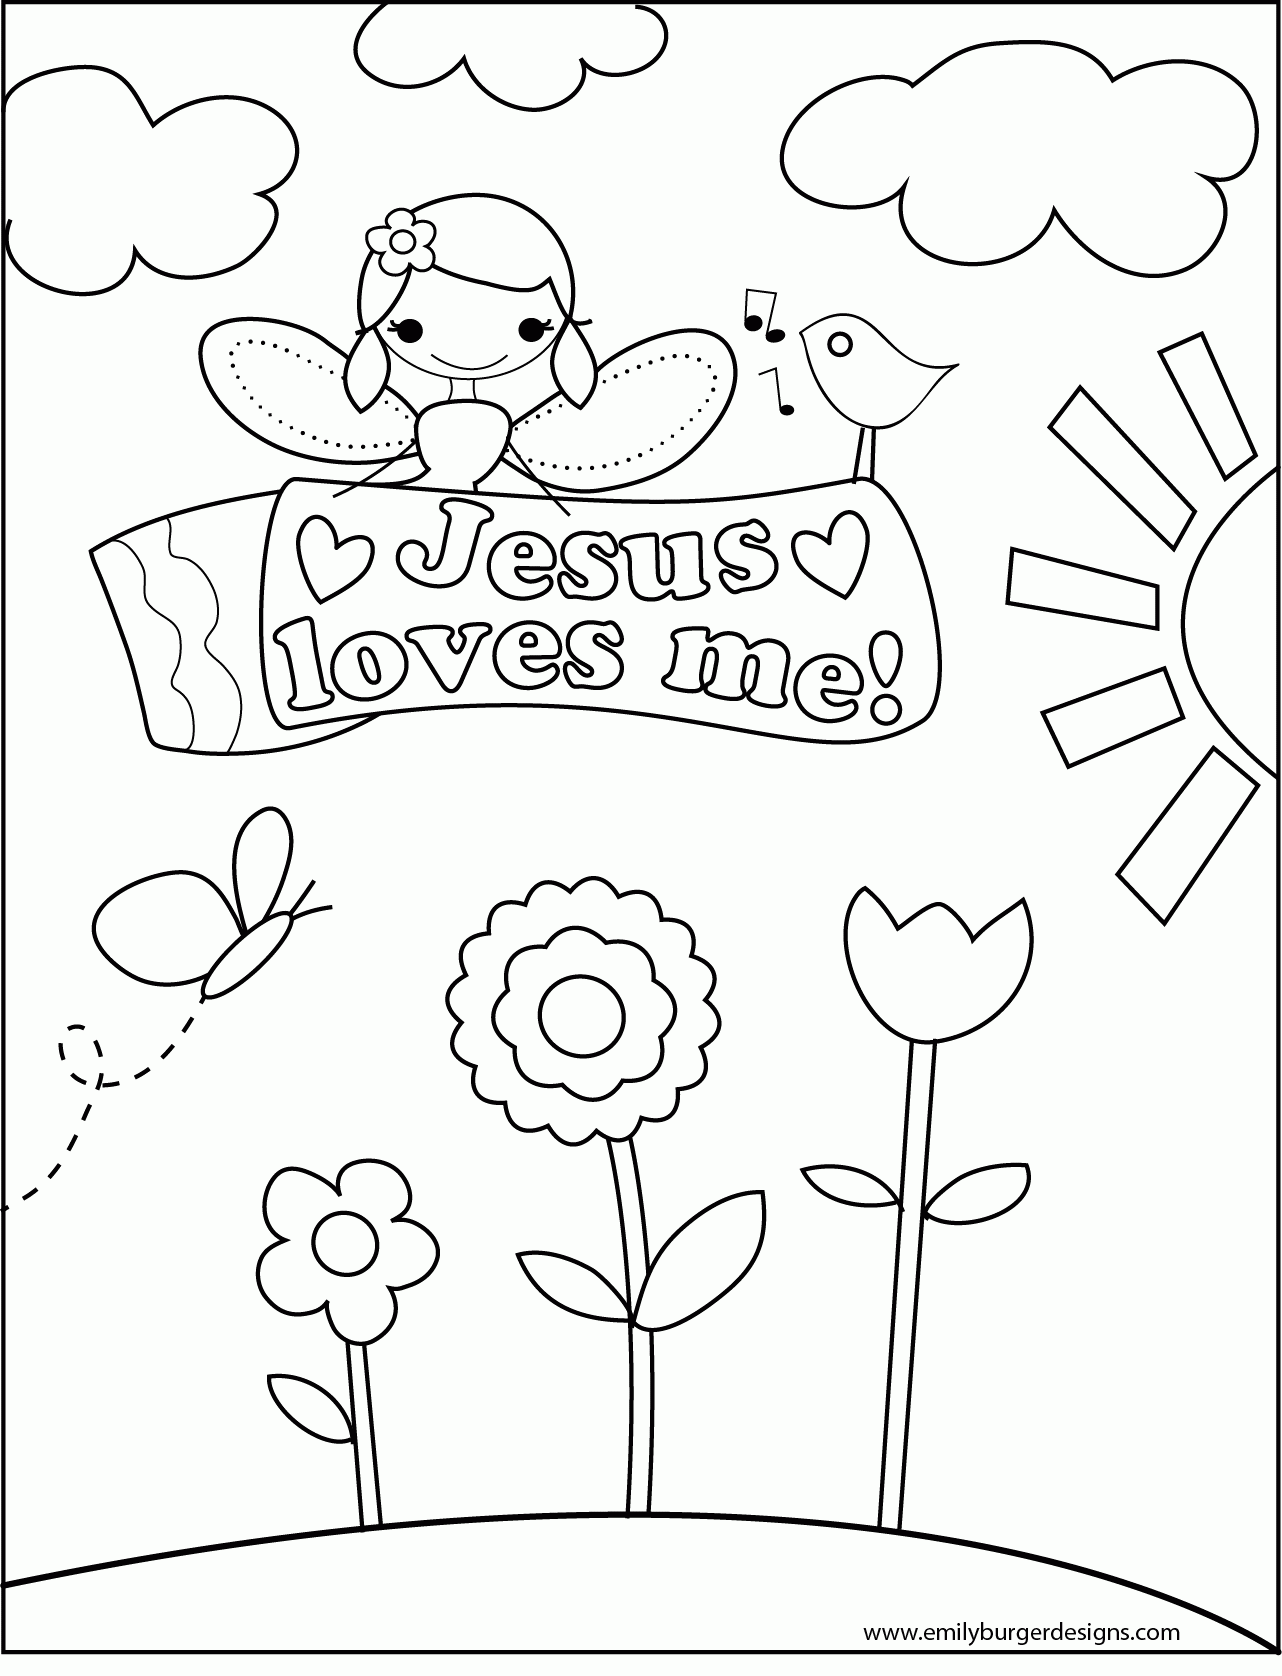 540 Animal I Love God Coloring Pages with disney character